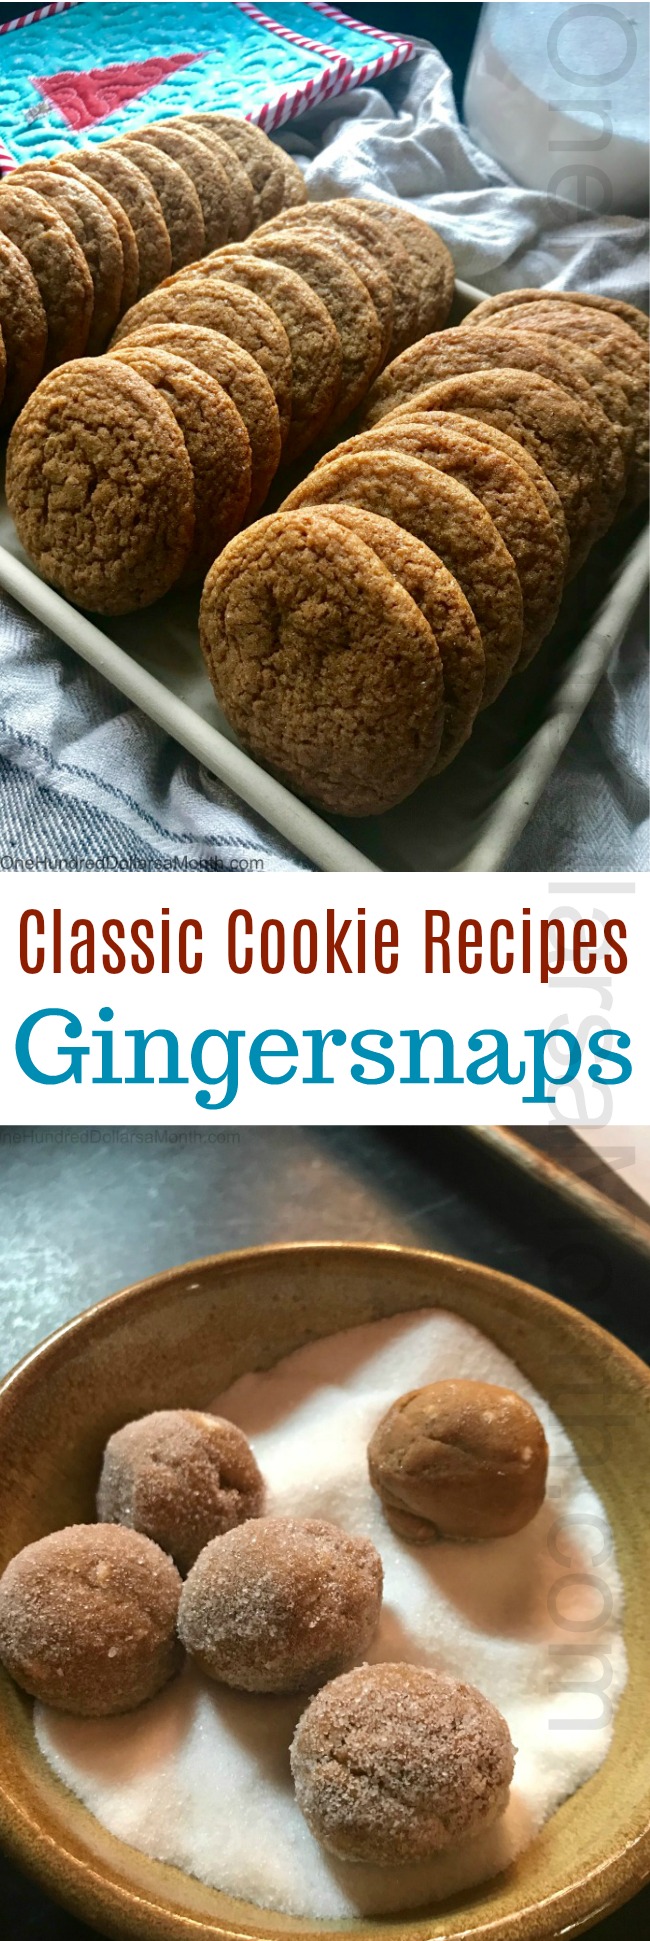 Classic Cookie Recipes – Gingersnaps